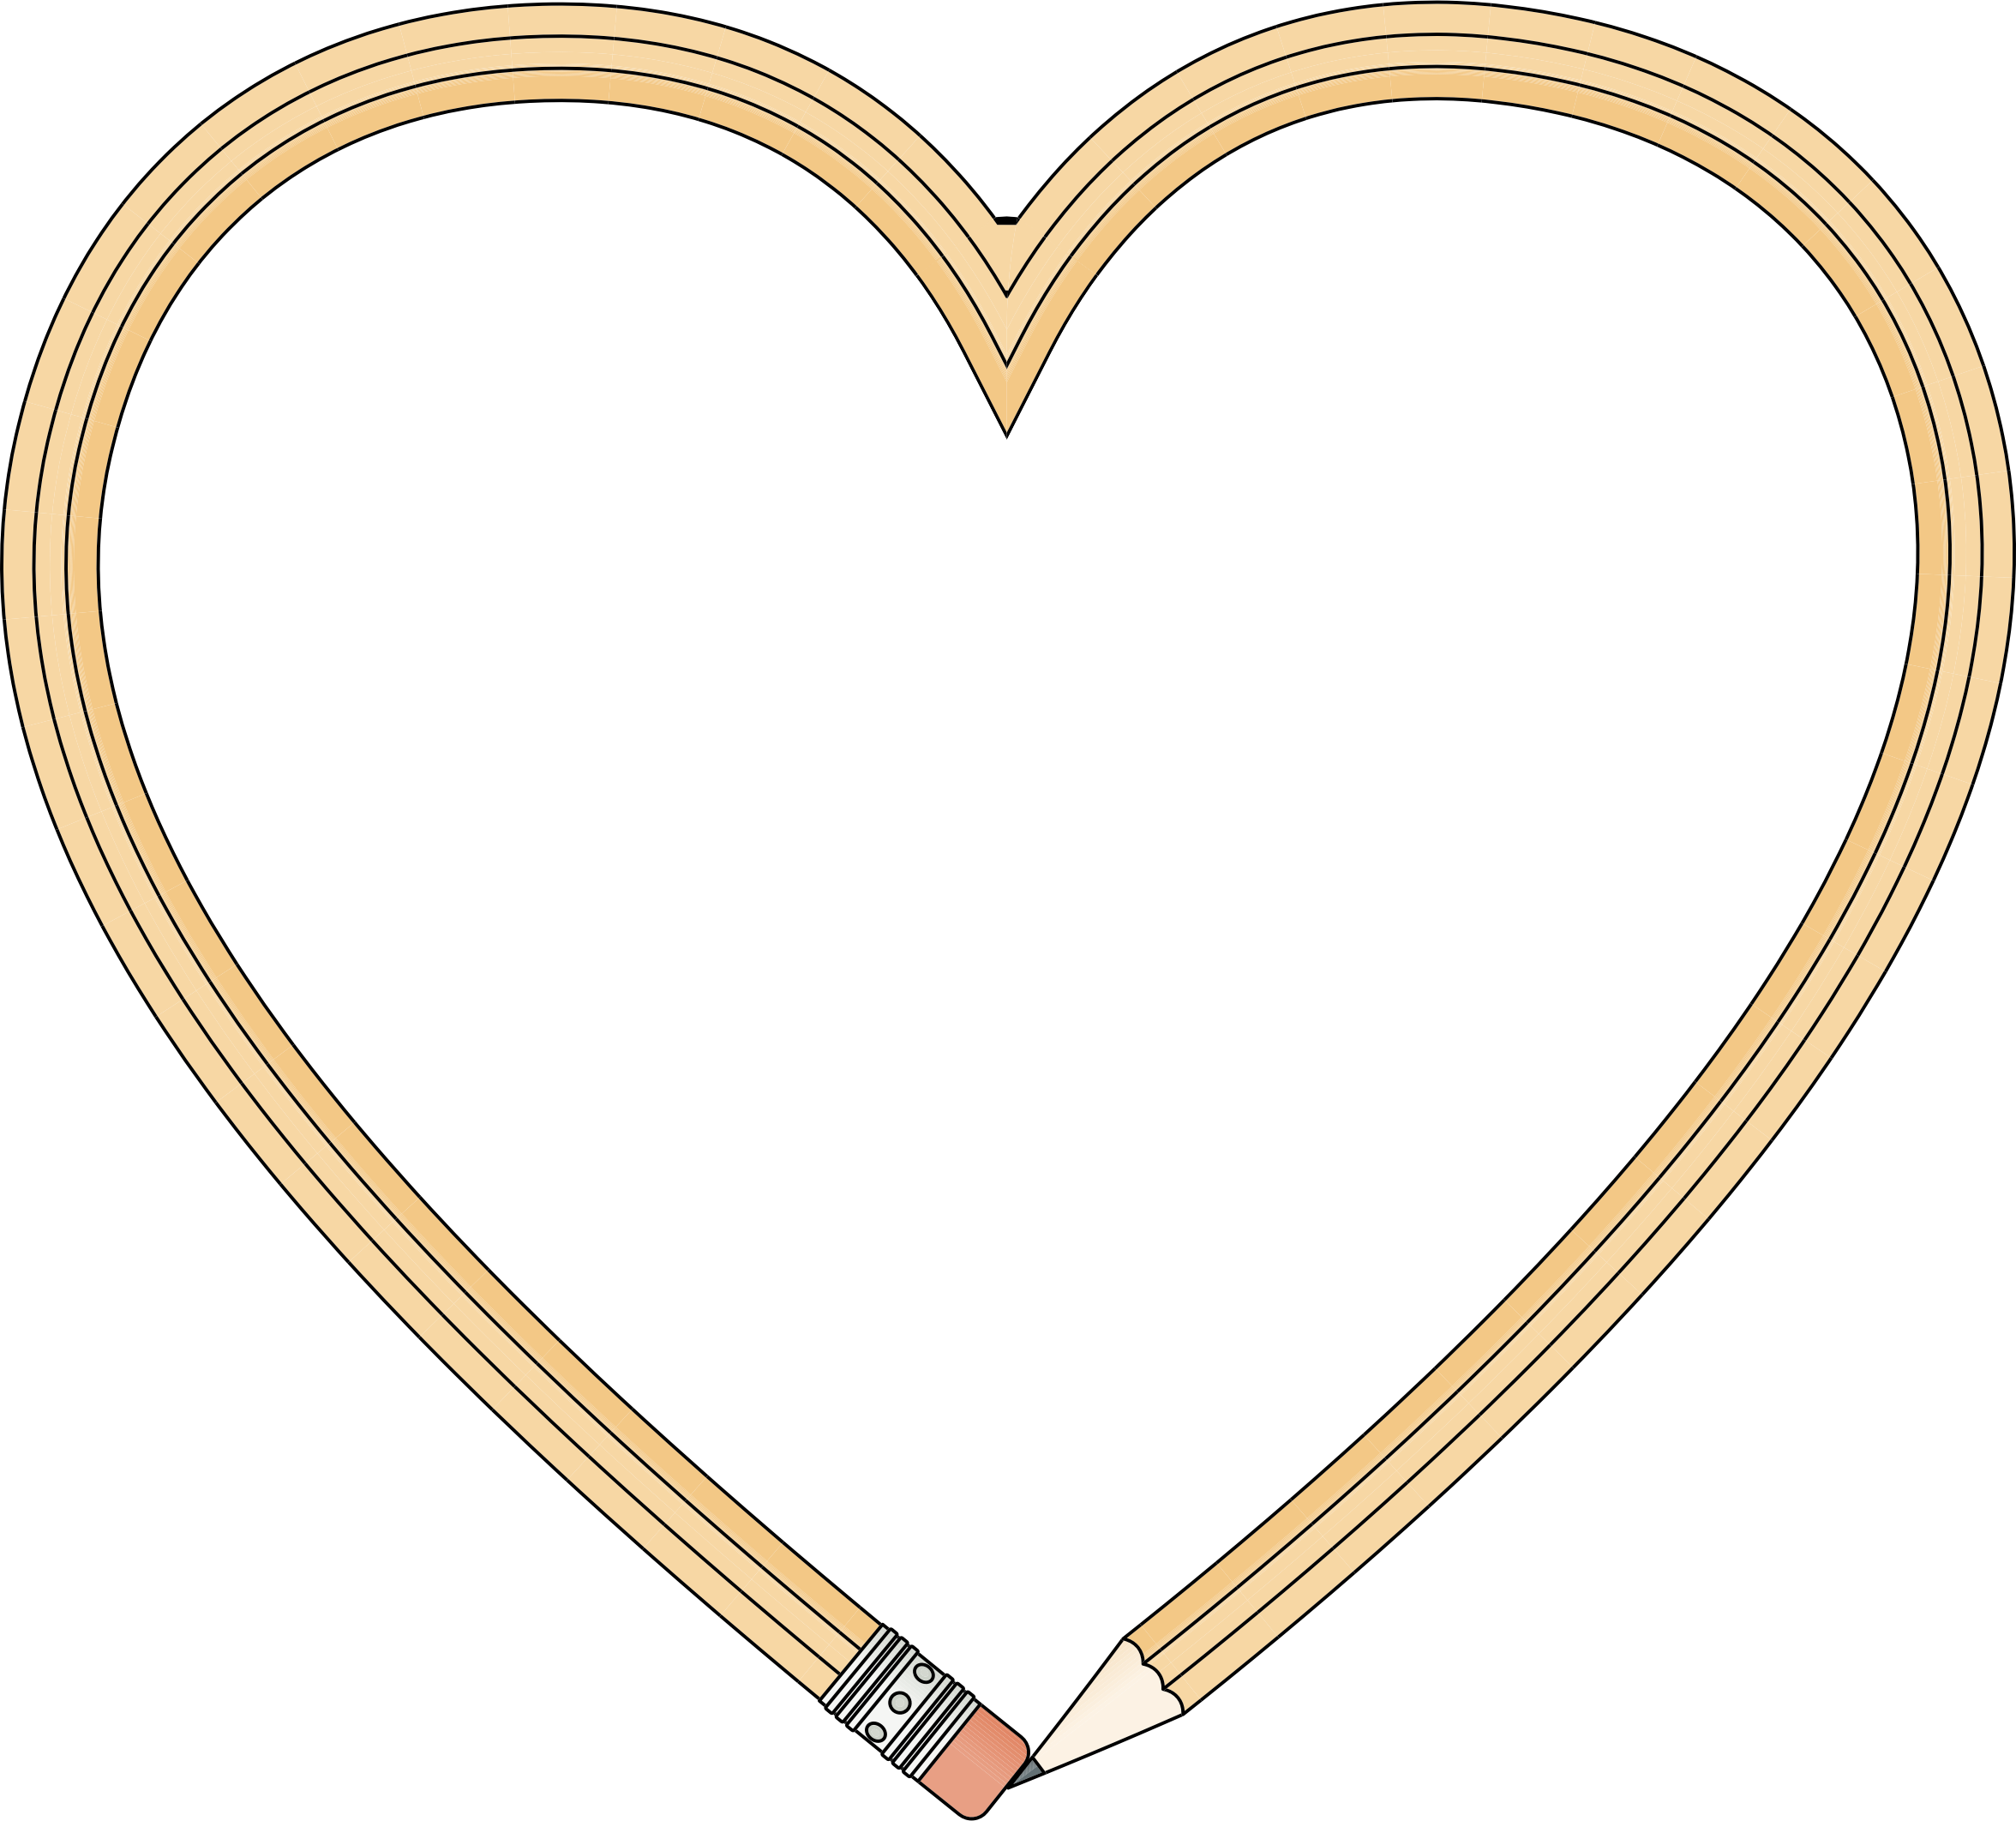 Pencils clipart valentine. Pencil heart and in